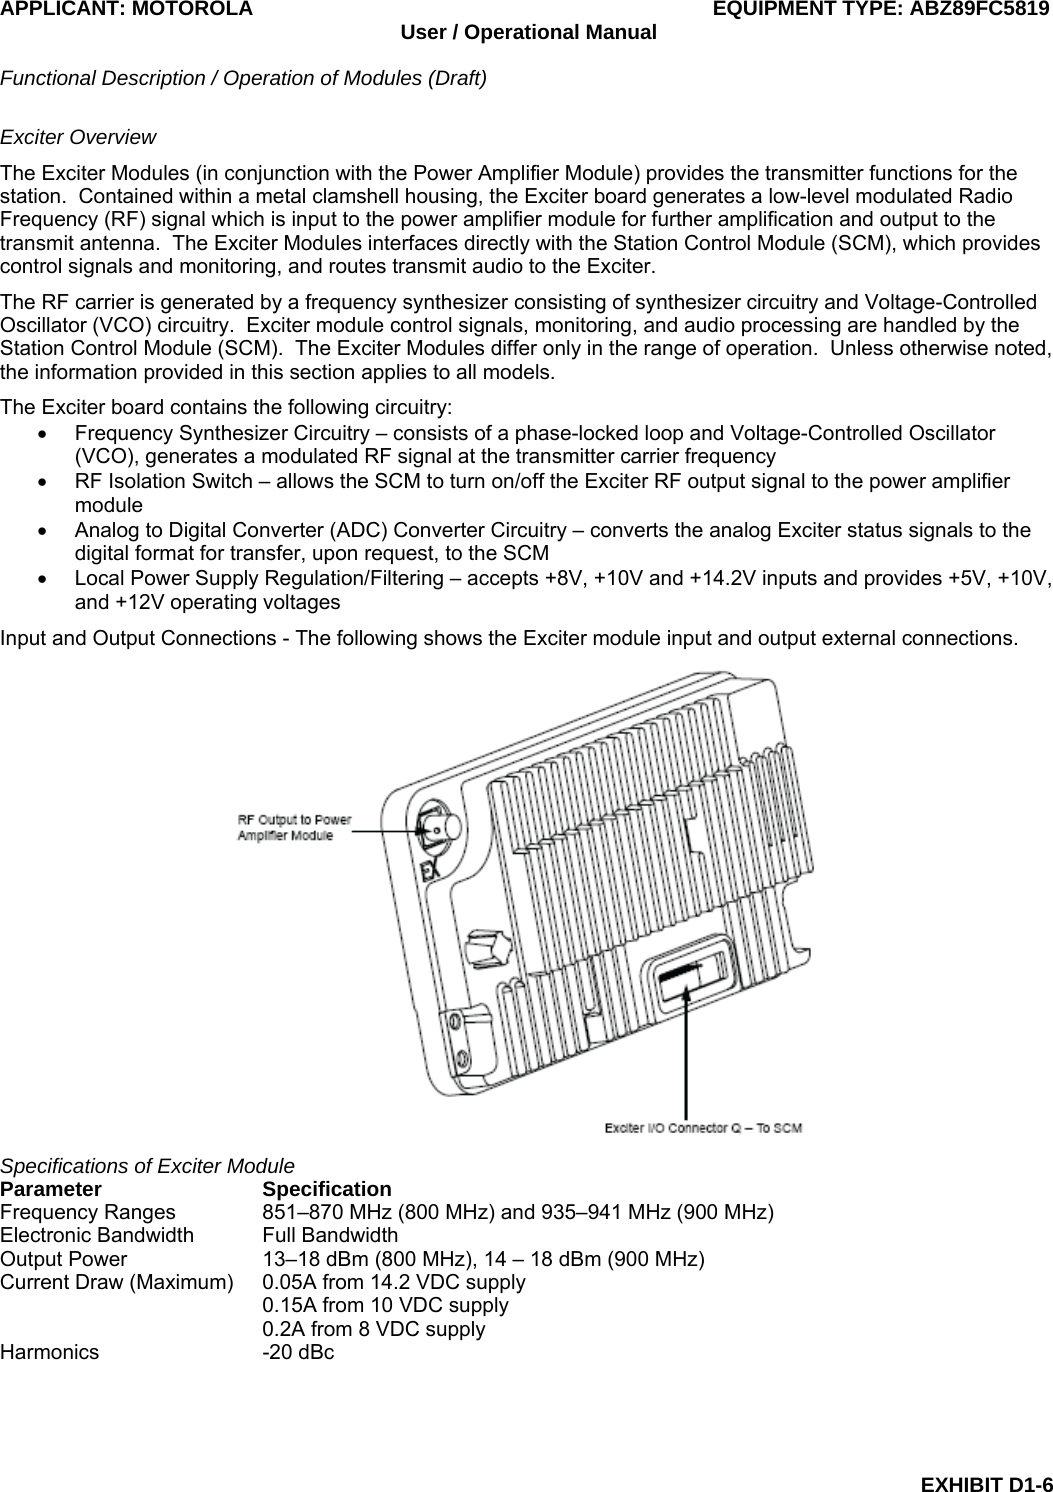 APPLICANT: MOTOROLA  EQUIPMENT TYPE: ABZ89FC5819 User / Operational Manual  Functional Description / Operation of Modules (Draft)  EXHIBIT D1-6 Exciter Overview The Exciter Modules (in conjunction with the Power Amplifier Module) provides the transmitter functions for the station.  Contained within a metal clamshell housing, the Exciter board generates a low-level modulated Radio Frequency (RF) signal which is input to the power amplifier module for further amplification and output to the transmit antenna.  The Exciter Modules interfaces directly with the Station Control Module (SCM), which provides control signals and monitoring, and routes transmit audio to the Exciter. The RF carrier is generated by a frequency synthesizer consisting of synthesizer circuitry and Voltage-Controlled Oscillator (VCO) circuitry.  Exciter module control signals, monitoring, and audio processing are handled by the Station Control Module (SCM).  The Exciter Modules differ only in the range of operation.  Unless otherwise noted, the information provided in this section applies to all models. The Exciter board contains the following circuitry: •  Frequency Synthesizer Circuitry – consists of a phase-locked loop and Voltage-Controlled Oscillator (VCO), generates a modulated RF signal at the transmitter carrier frequency •  RF Isolation Switch – allows the SCM to turn on/off the Exciter RF output signal to the power amplifier module •  Analog to Digital Converter (ADC) Converter Circuitry – converts the analog Exciter status signals to the digital format for transfer, upon request, to the SCM •  Local Power Supply Regulation/Filtering – accepts +8V, +10V and +14.2V inputs and provides +5V, +10V, and +12V operating voltages Input and Output Connections - The following shows the Exciter module input and output external connections.  Specifications of Exciter Module Parameter Specification Frequency Ranges  851–870 MHz (800 MHz) and 935–941 MHz (900 MHz) Electronic Bandwidth  Full Bandwidth Output Power  13–18 dBm (800 MHz), 14 – 18 dBm (900 MHz) Current Draw (Maximum)  0.05A from 14.2 VDC supply   0.15A from 10 VDC supply   0.2A from 8 VDC supply Harmonics -20 dBc 